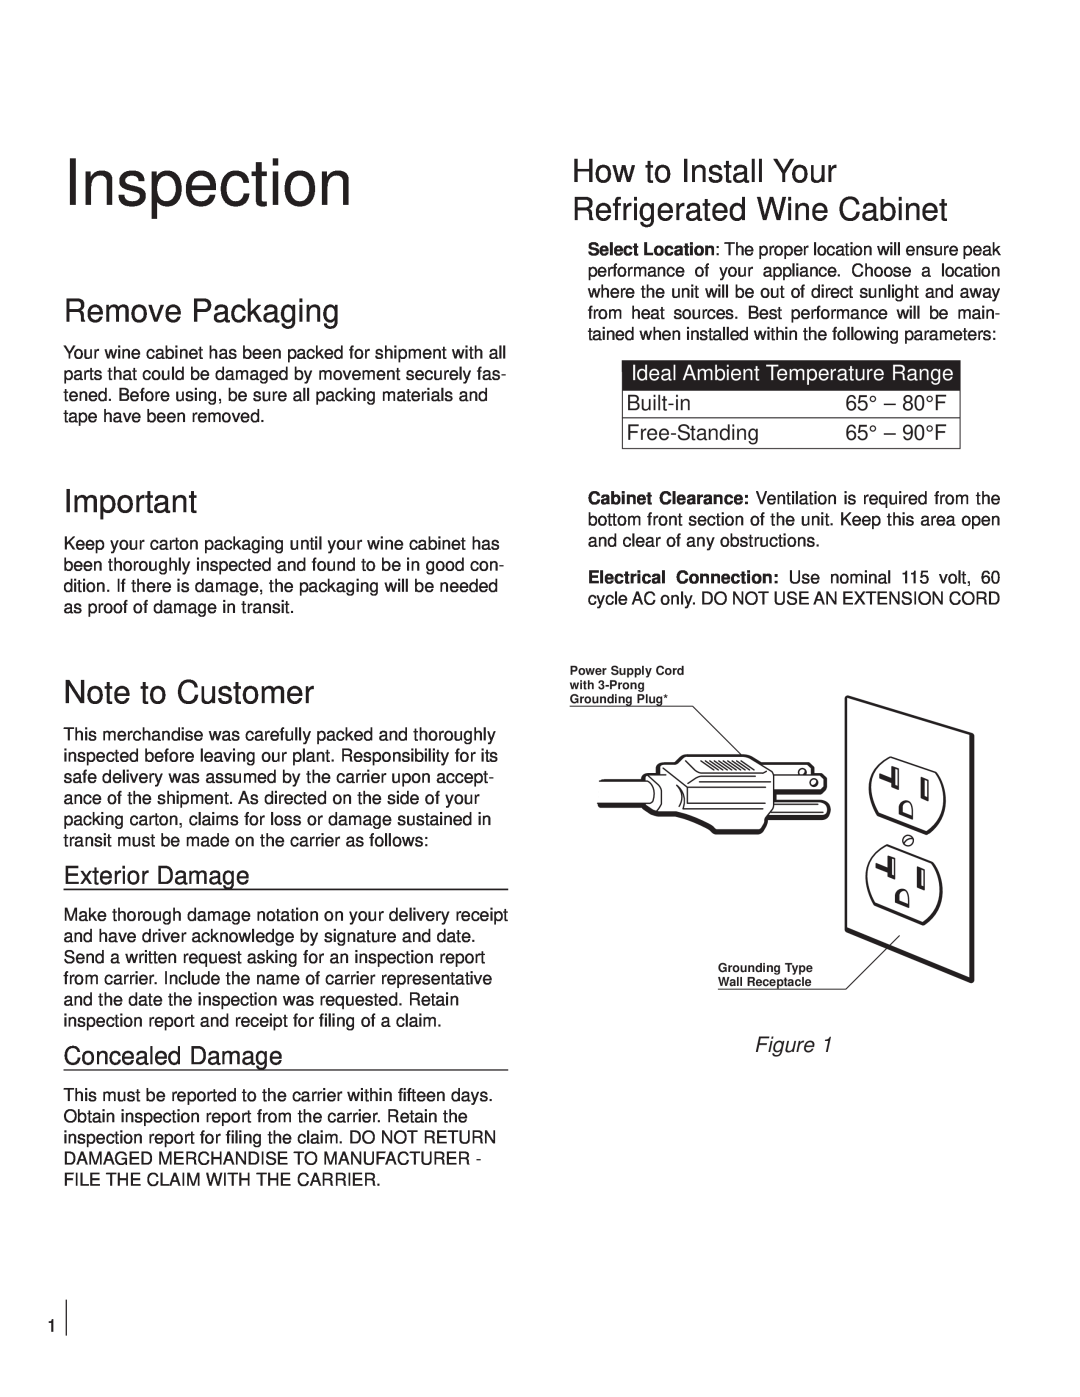 Marvel Industries Refrigerated Wine Chiller manual Inspection, Remove Packaging, Note to Customer, Exterior Damage 